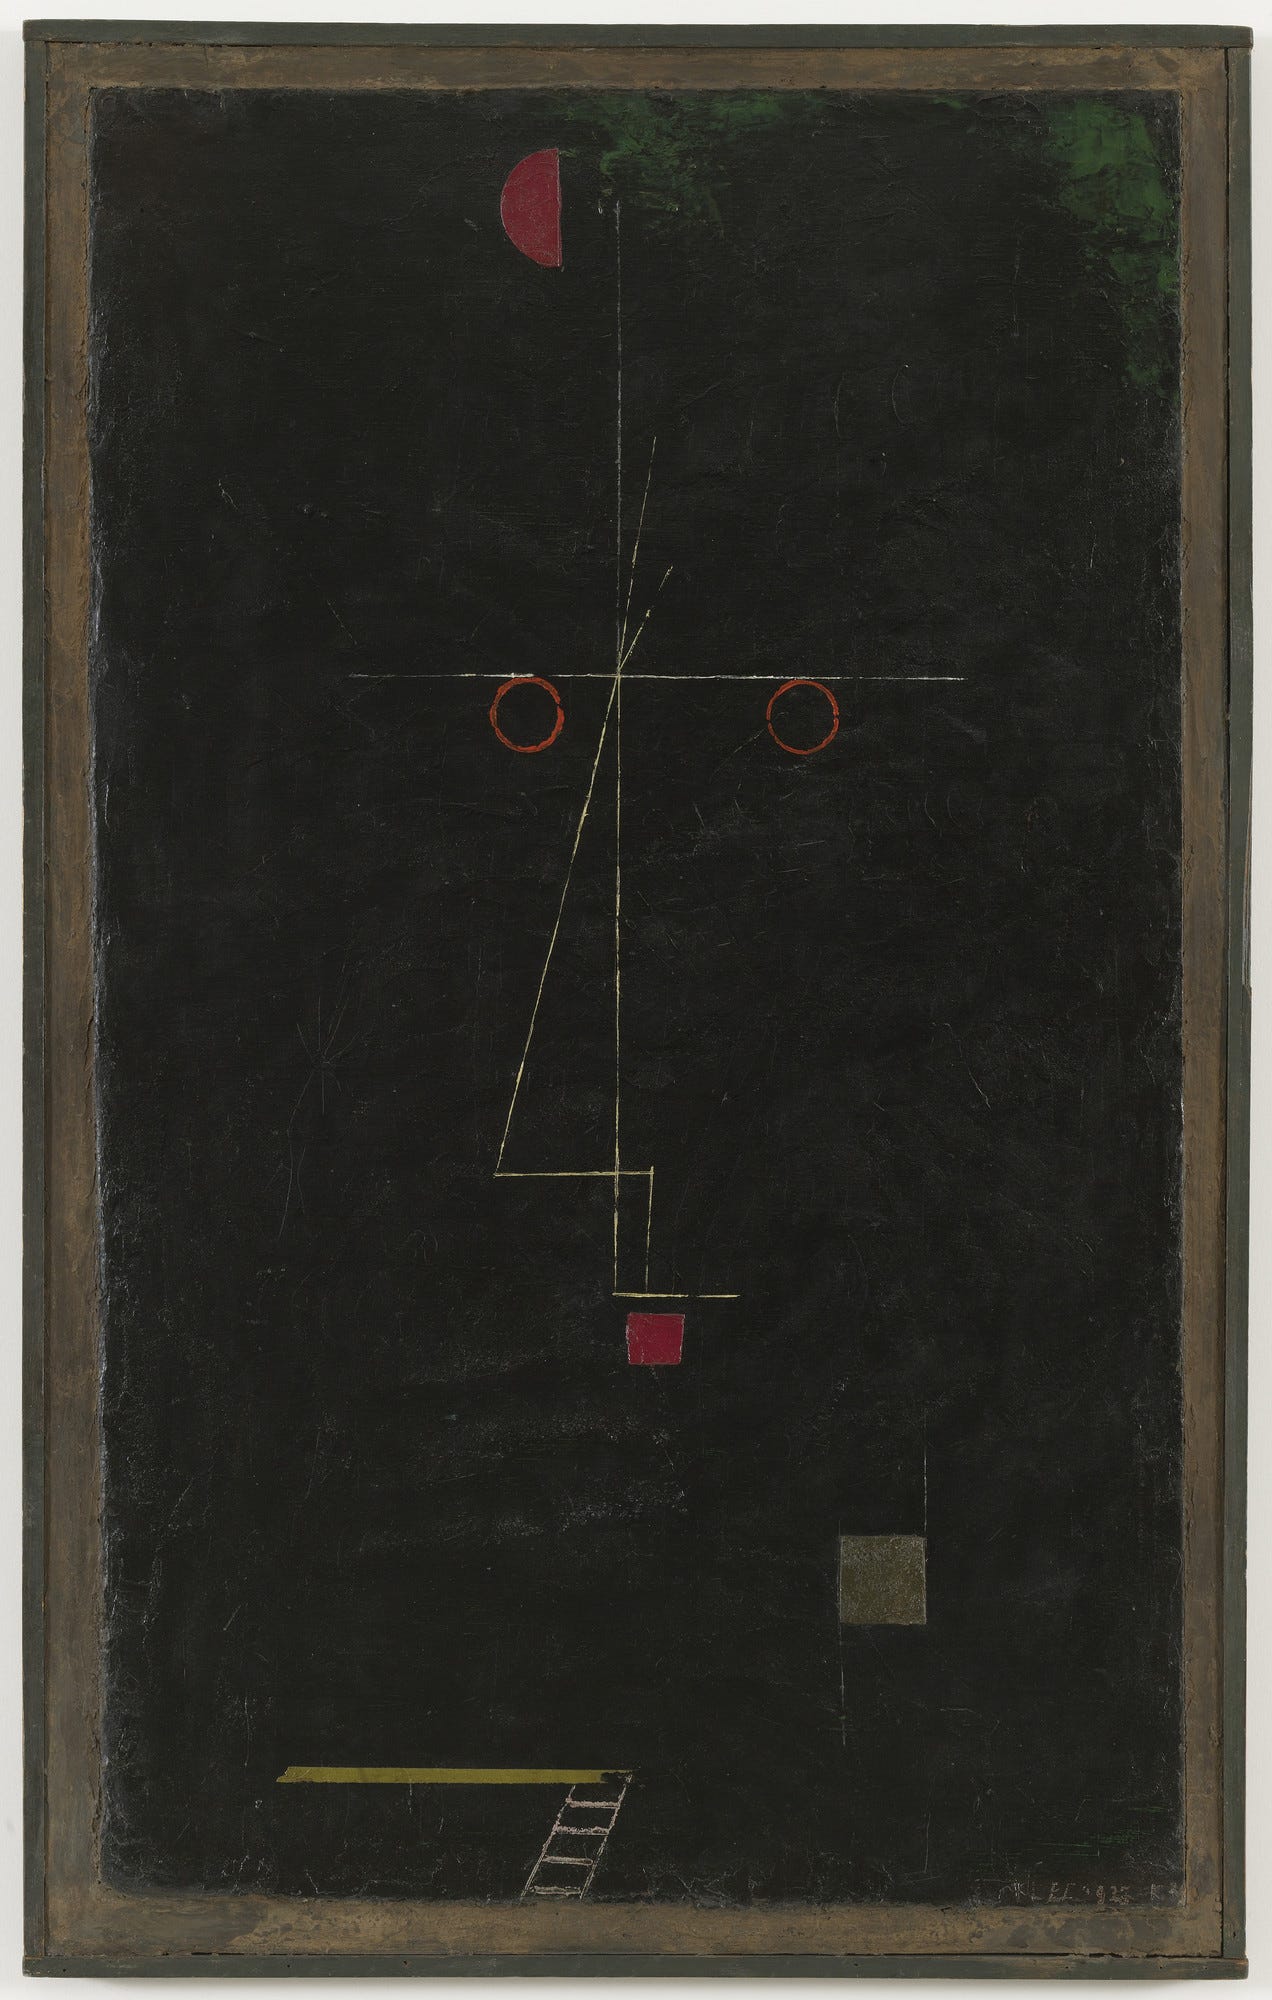 Paul Klee. Portrait of an Equilibrist. 1927 | MoMA